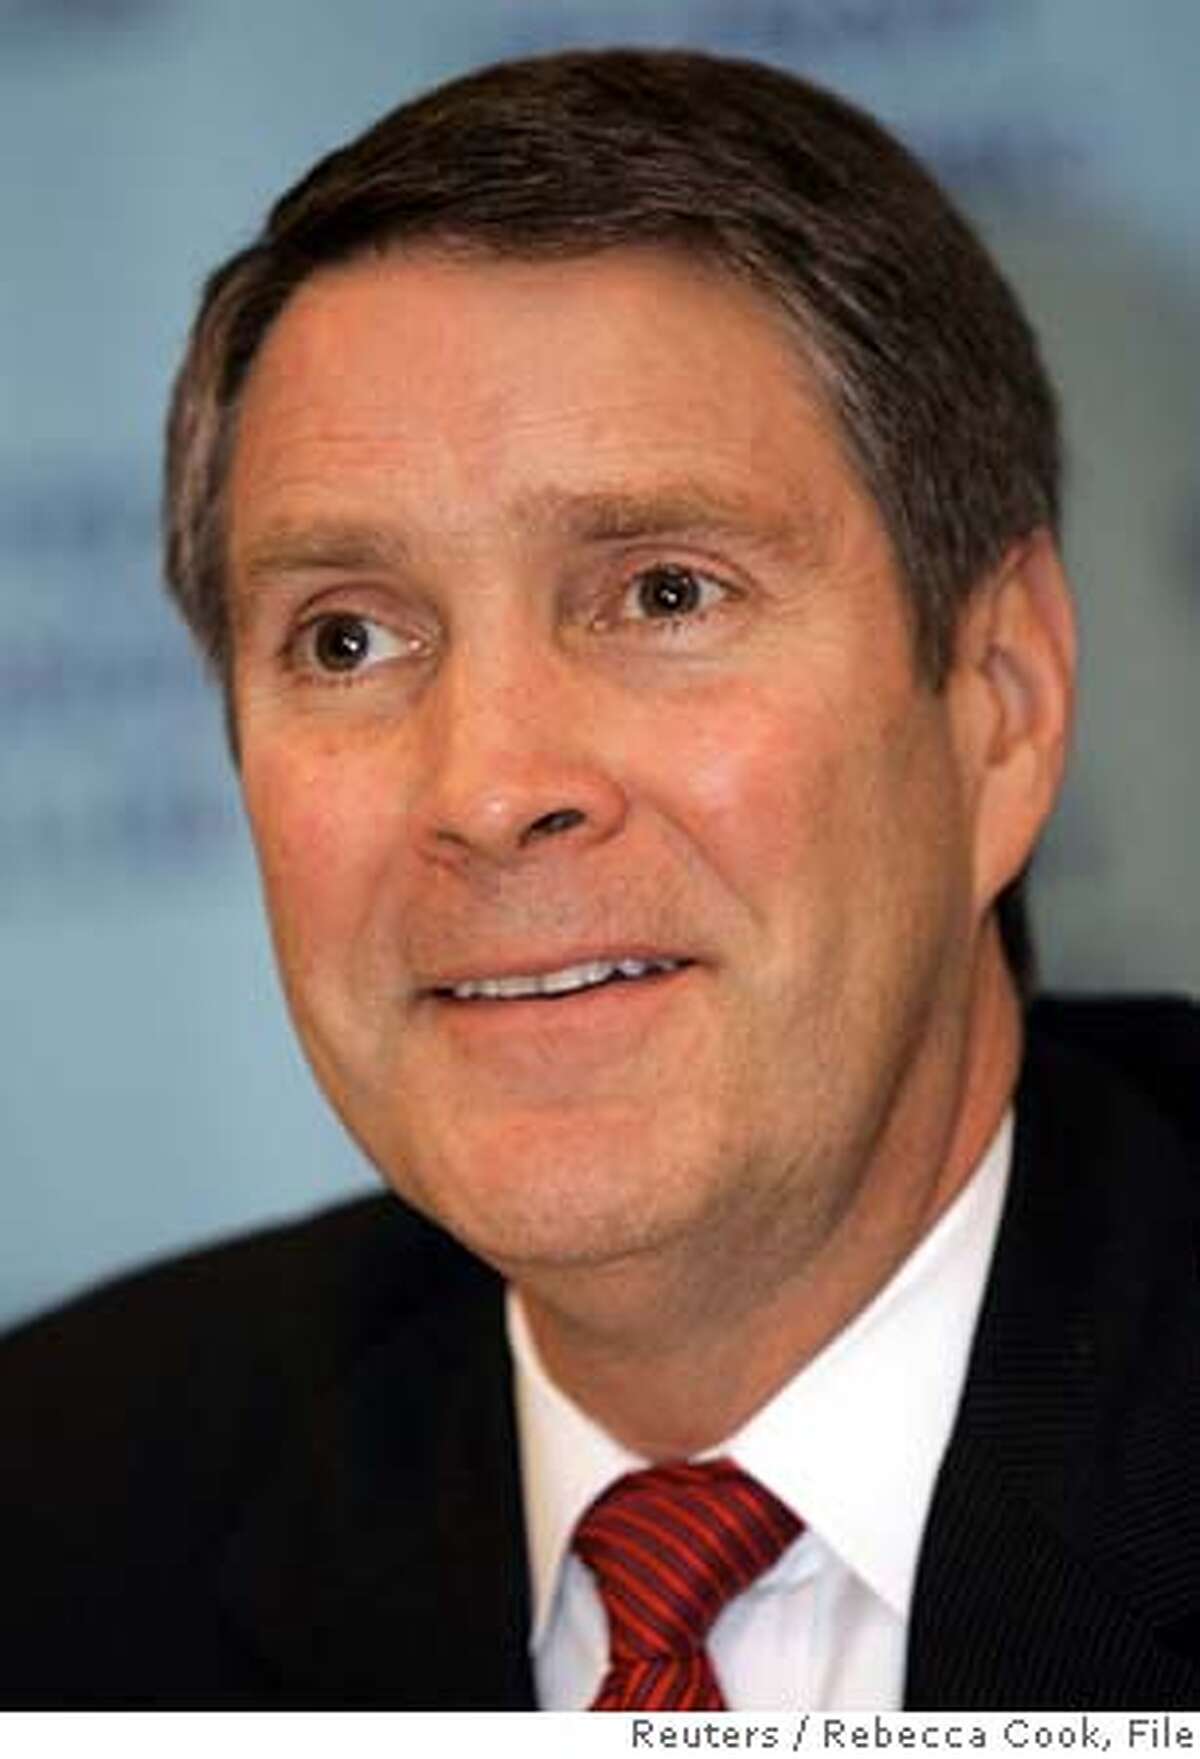 Senate Majority Leader Bill Frist (R-TN) speaks with the media after addressing the Detroit Economic Club in Detroit, Michigan February 27, 2006. Frist spoke about various domestic and global economic issues and the need to reform America's health care system. REUTERS/Rebecca Cook 0